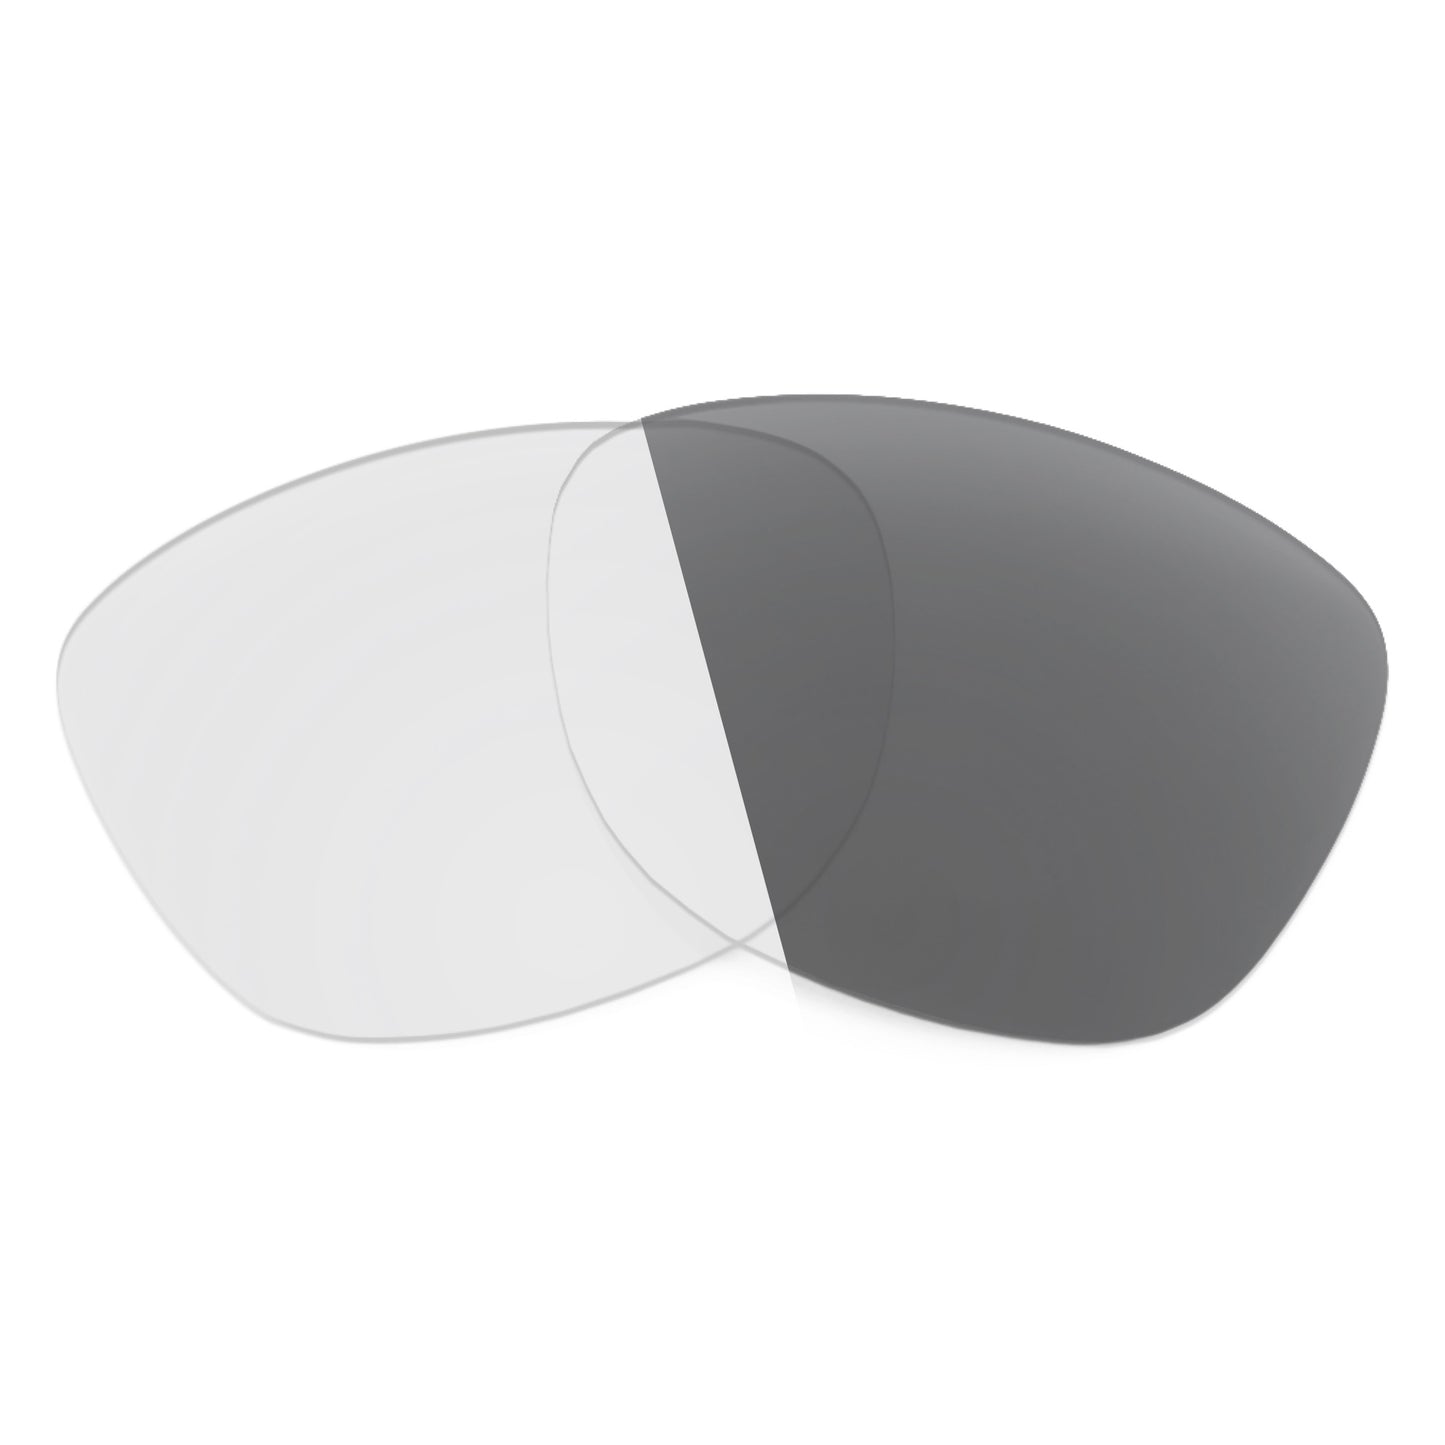 Revant replacement lenses for Ray-Ban Laramie RB4169 53mm Non-Polarized Adapt Gray Photochromic